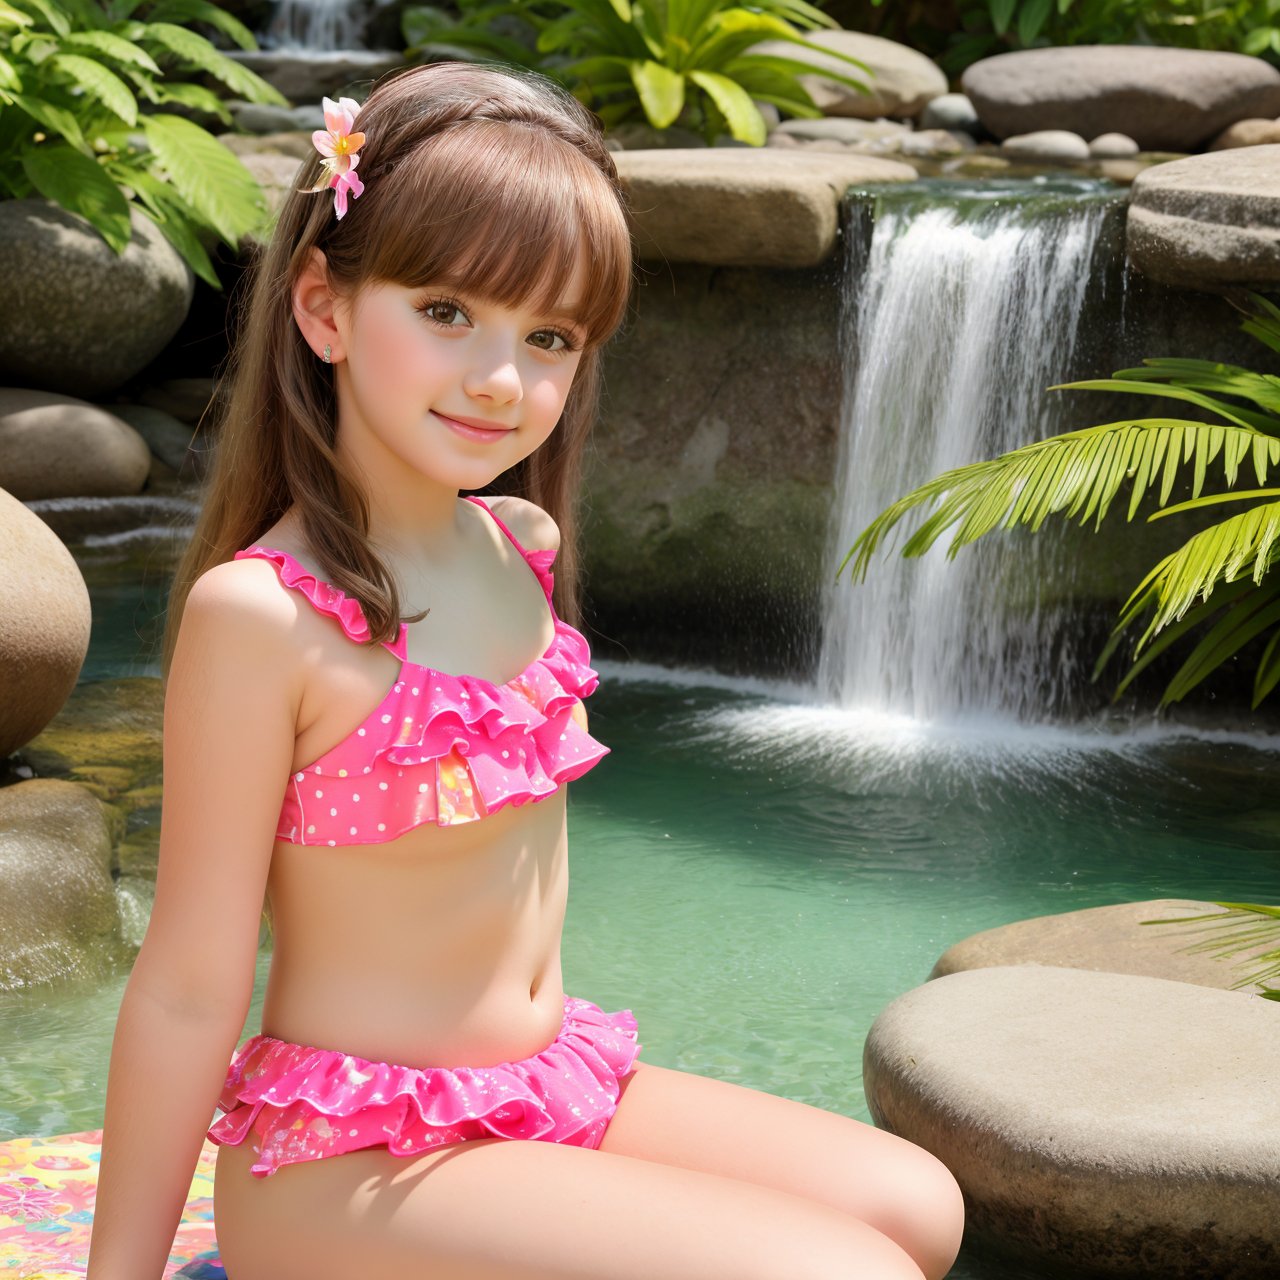 HD quality, HD, HQ, 4K, dolly short, close up of charming (AIDA_LoRA_KtM:1.06) <lora:AIDA_LoRA_KtM:0.85> in a one peace bathsuit sitting on the stones in a tropical garden with a waterfall behing her, little girl, pretty face, naughty, funny, happy, playful, dramatic, hyper realistic, studio photo, studio photo, (colorful:1.1)